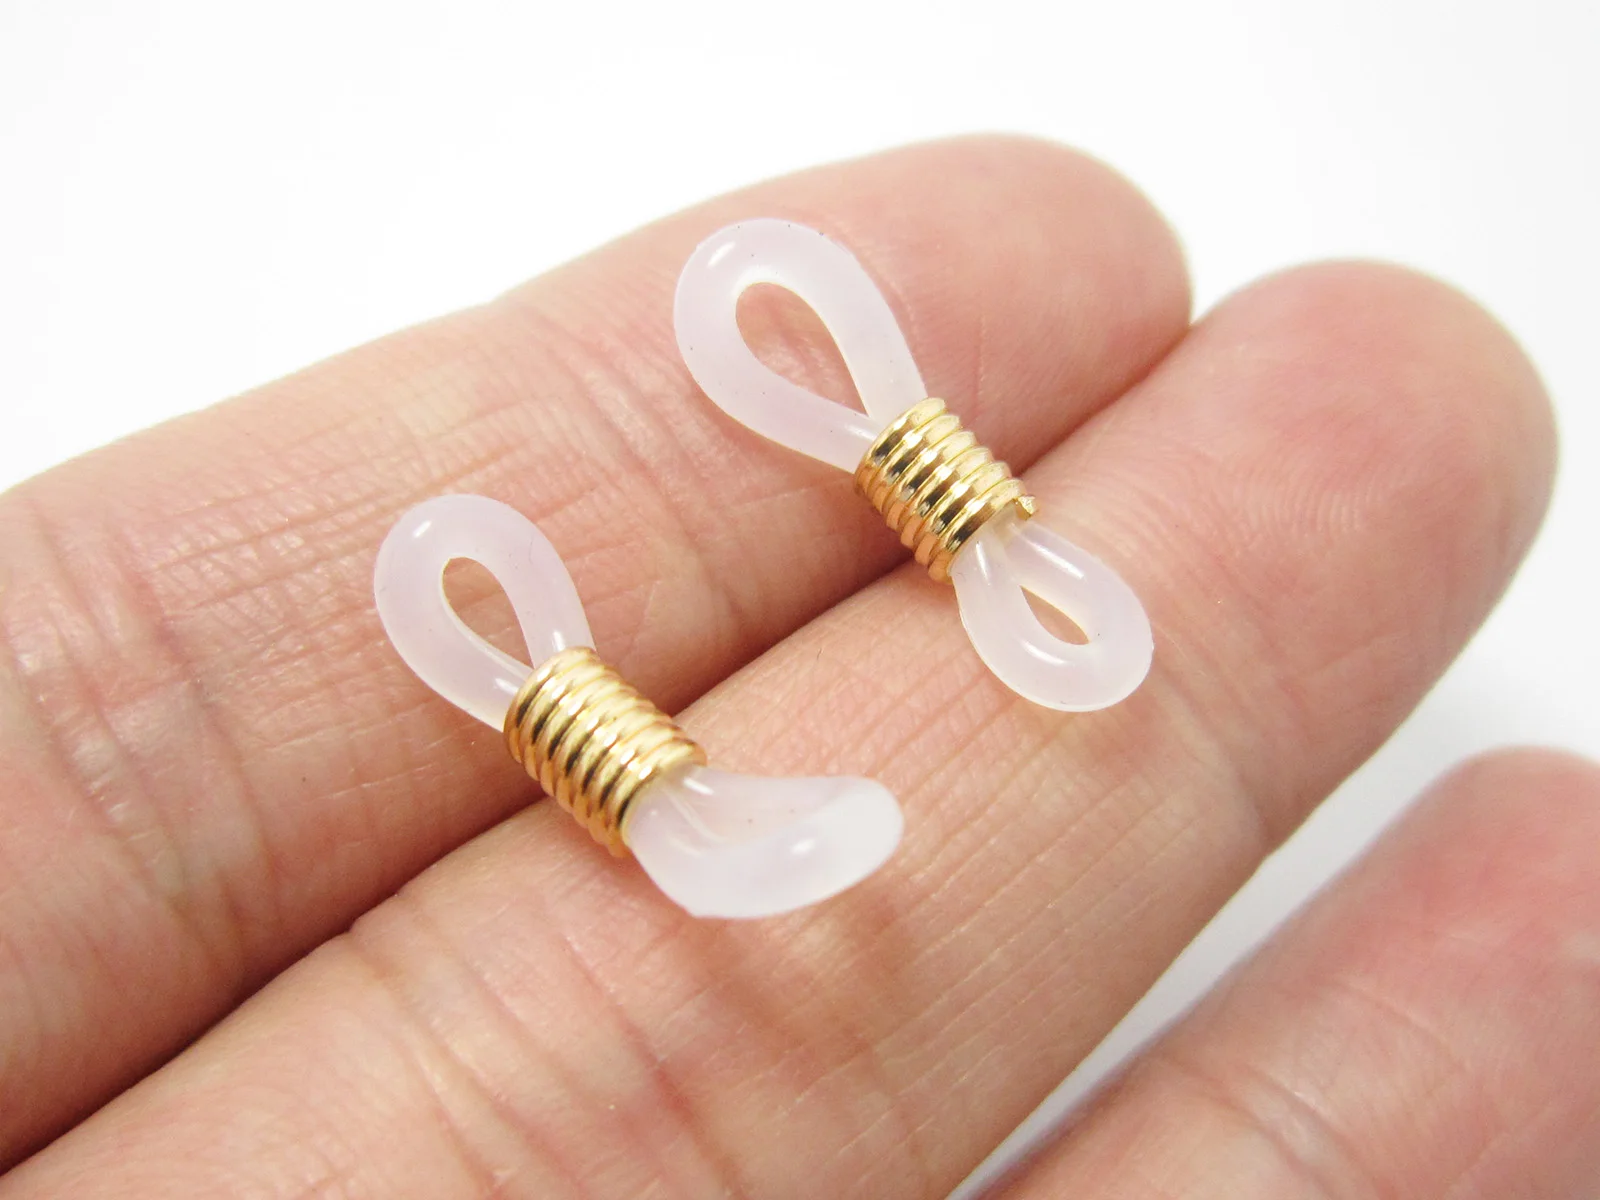 

50pcs Eye Glass Holder, Eyeglass Spectacle Loop Ends, 20mm, Silicone, Rubber Connector, Charm Holder, Gold Spring - R1229